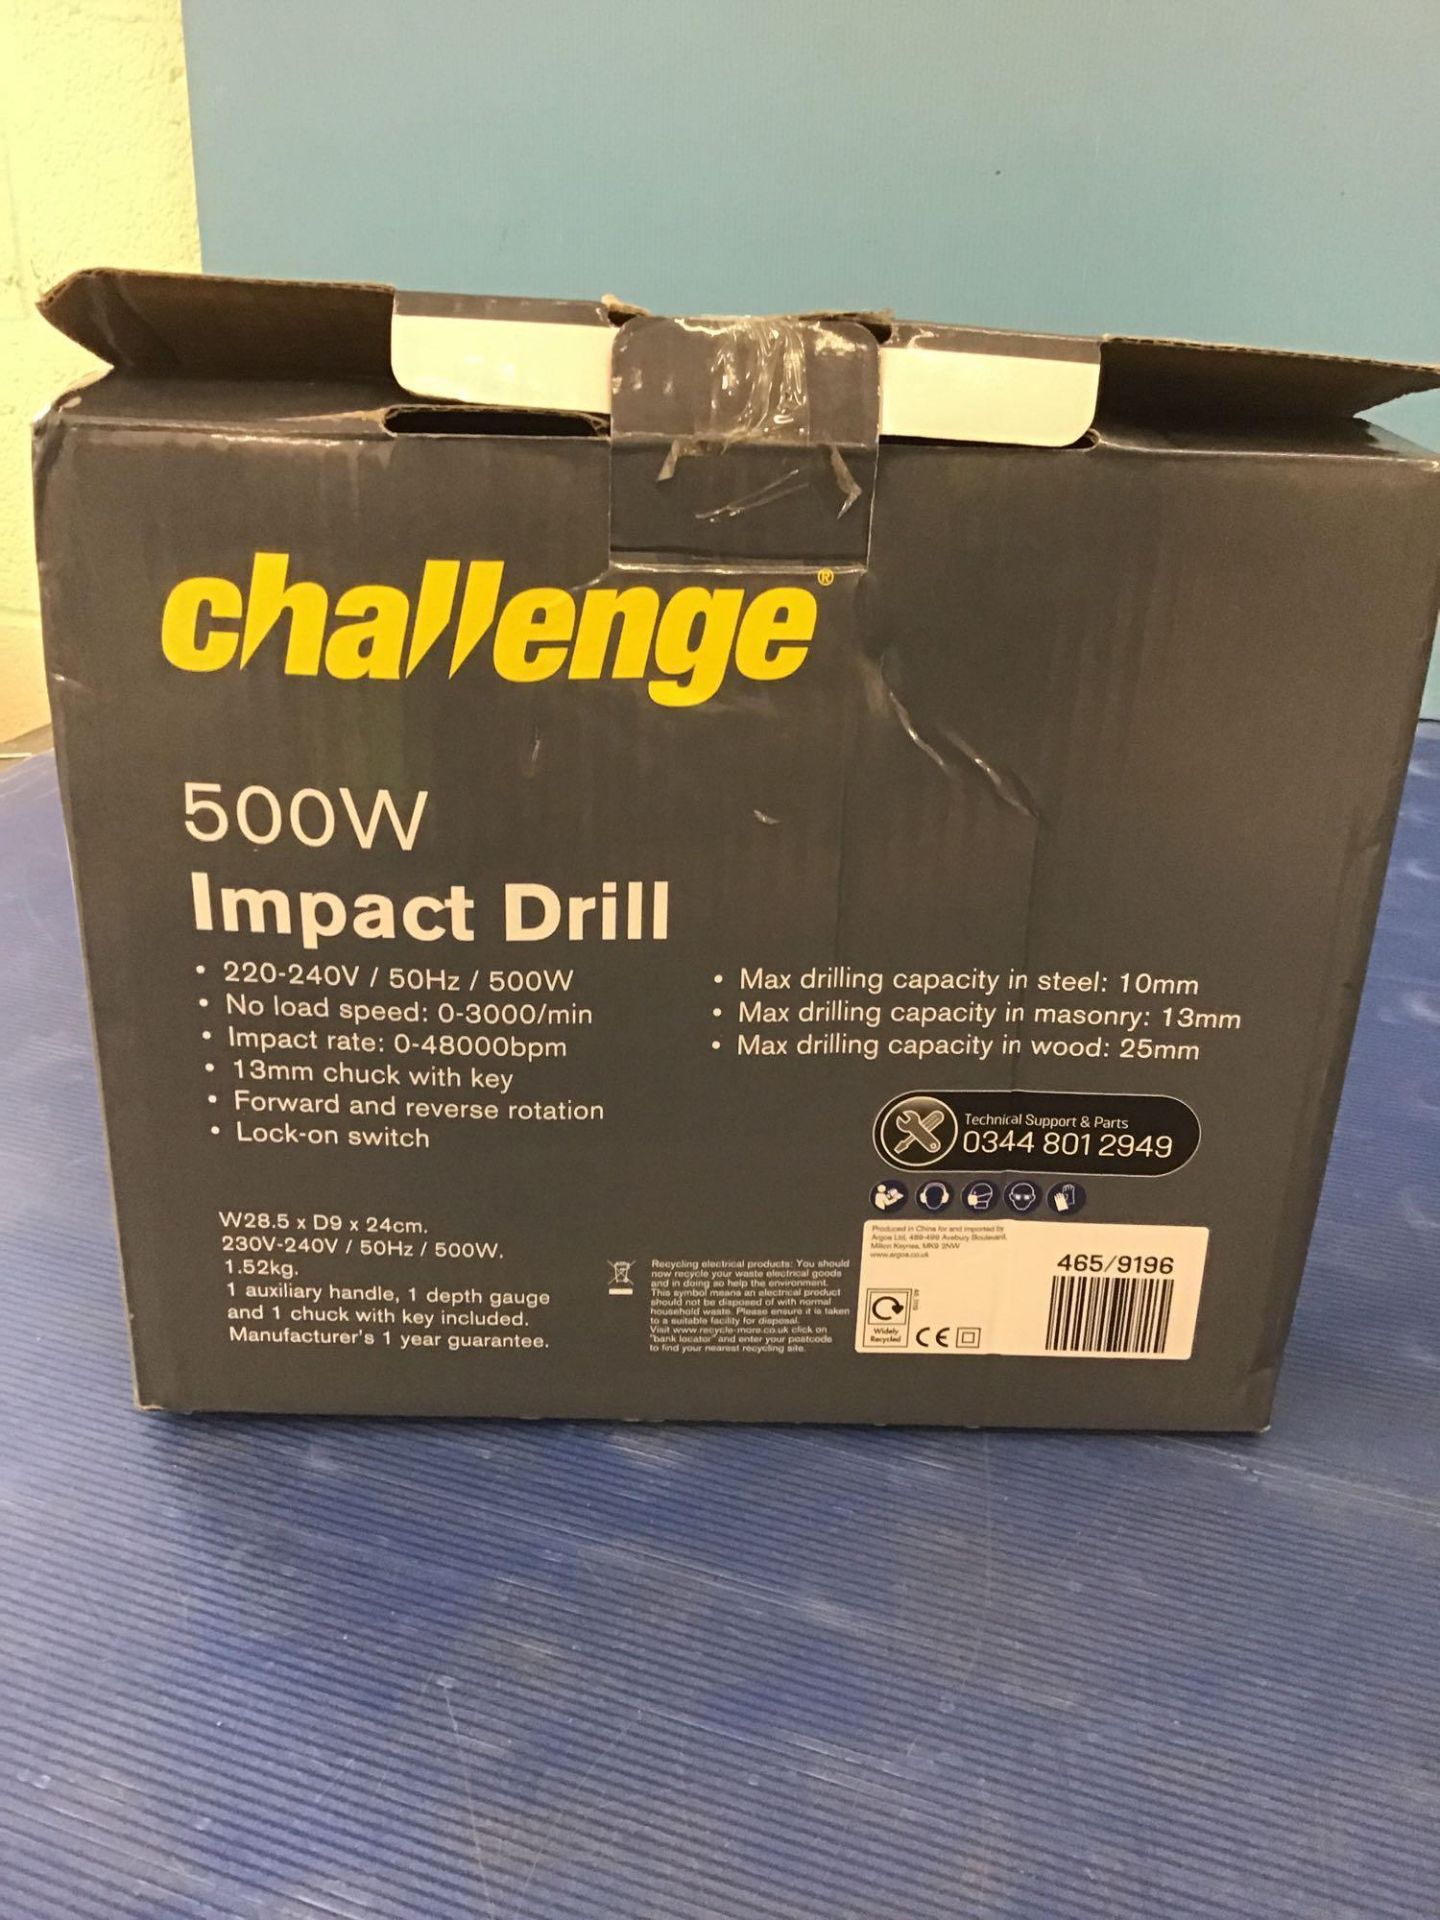 Challenge Corded Impact Drill - 500W, £15.00 RRP - Image 3 of 6